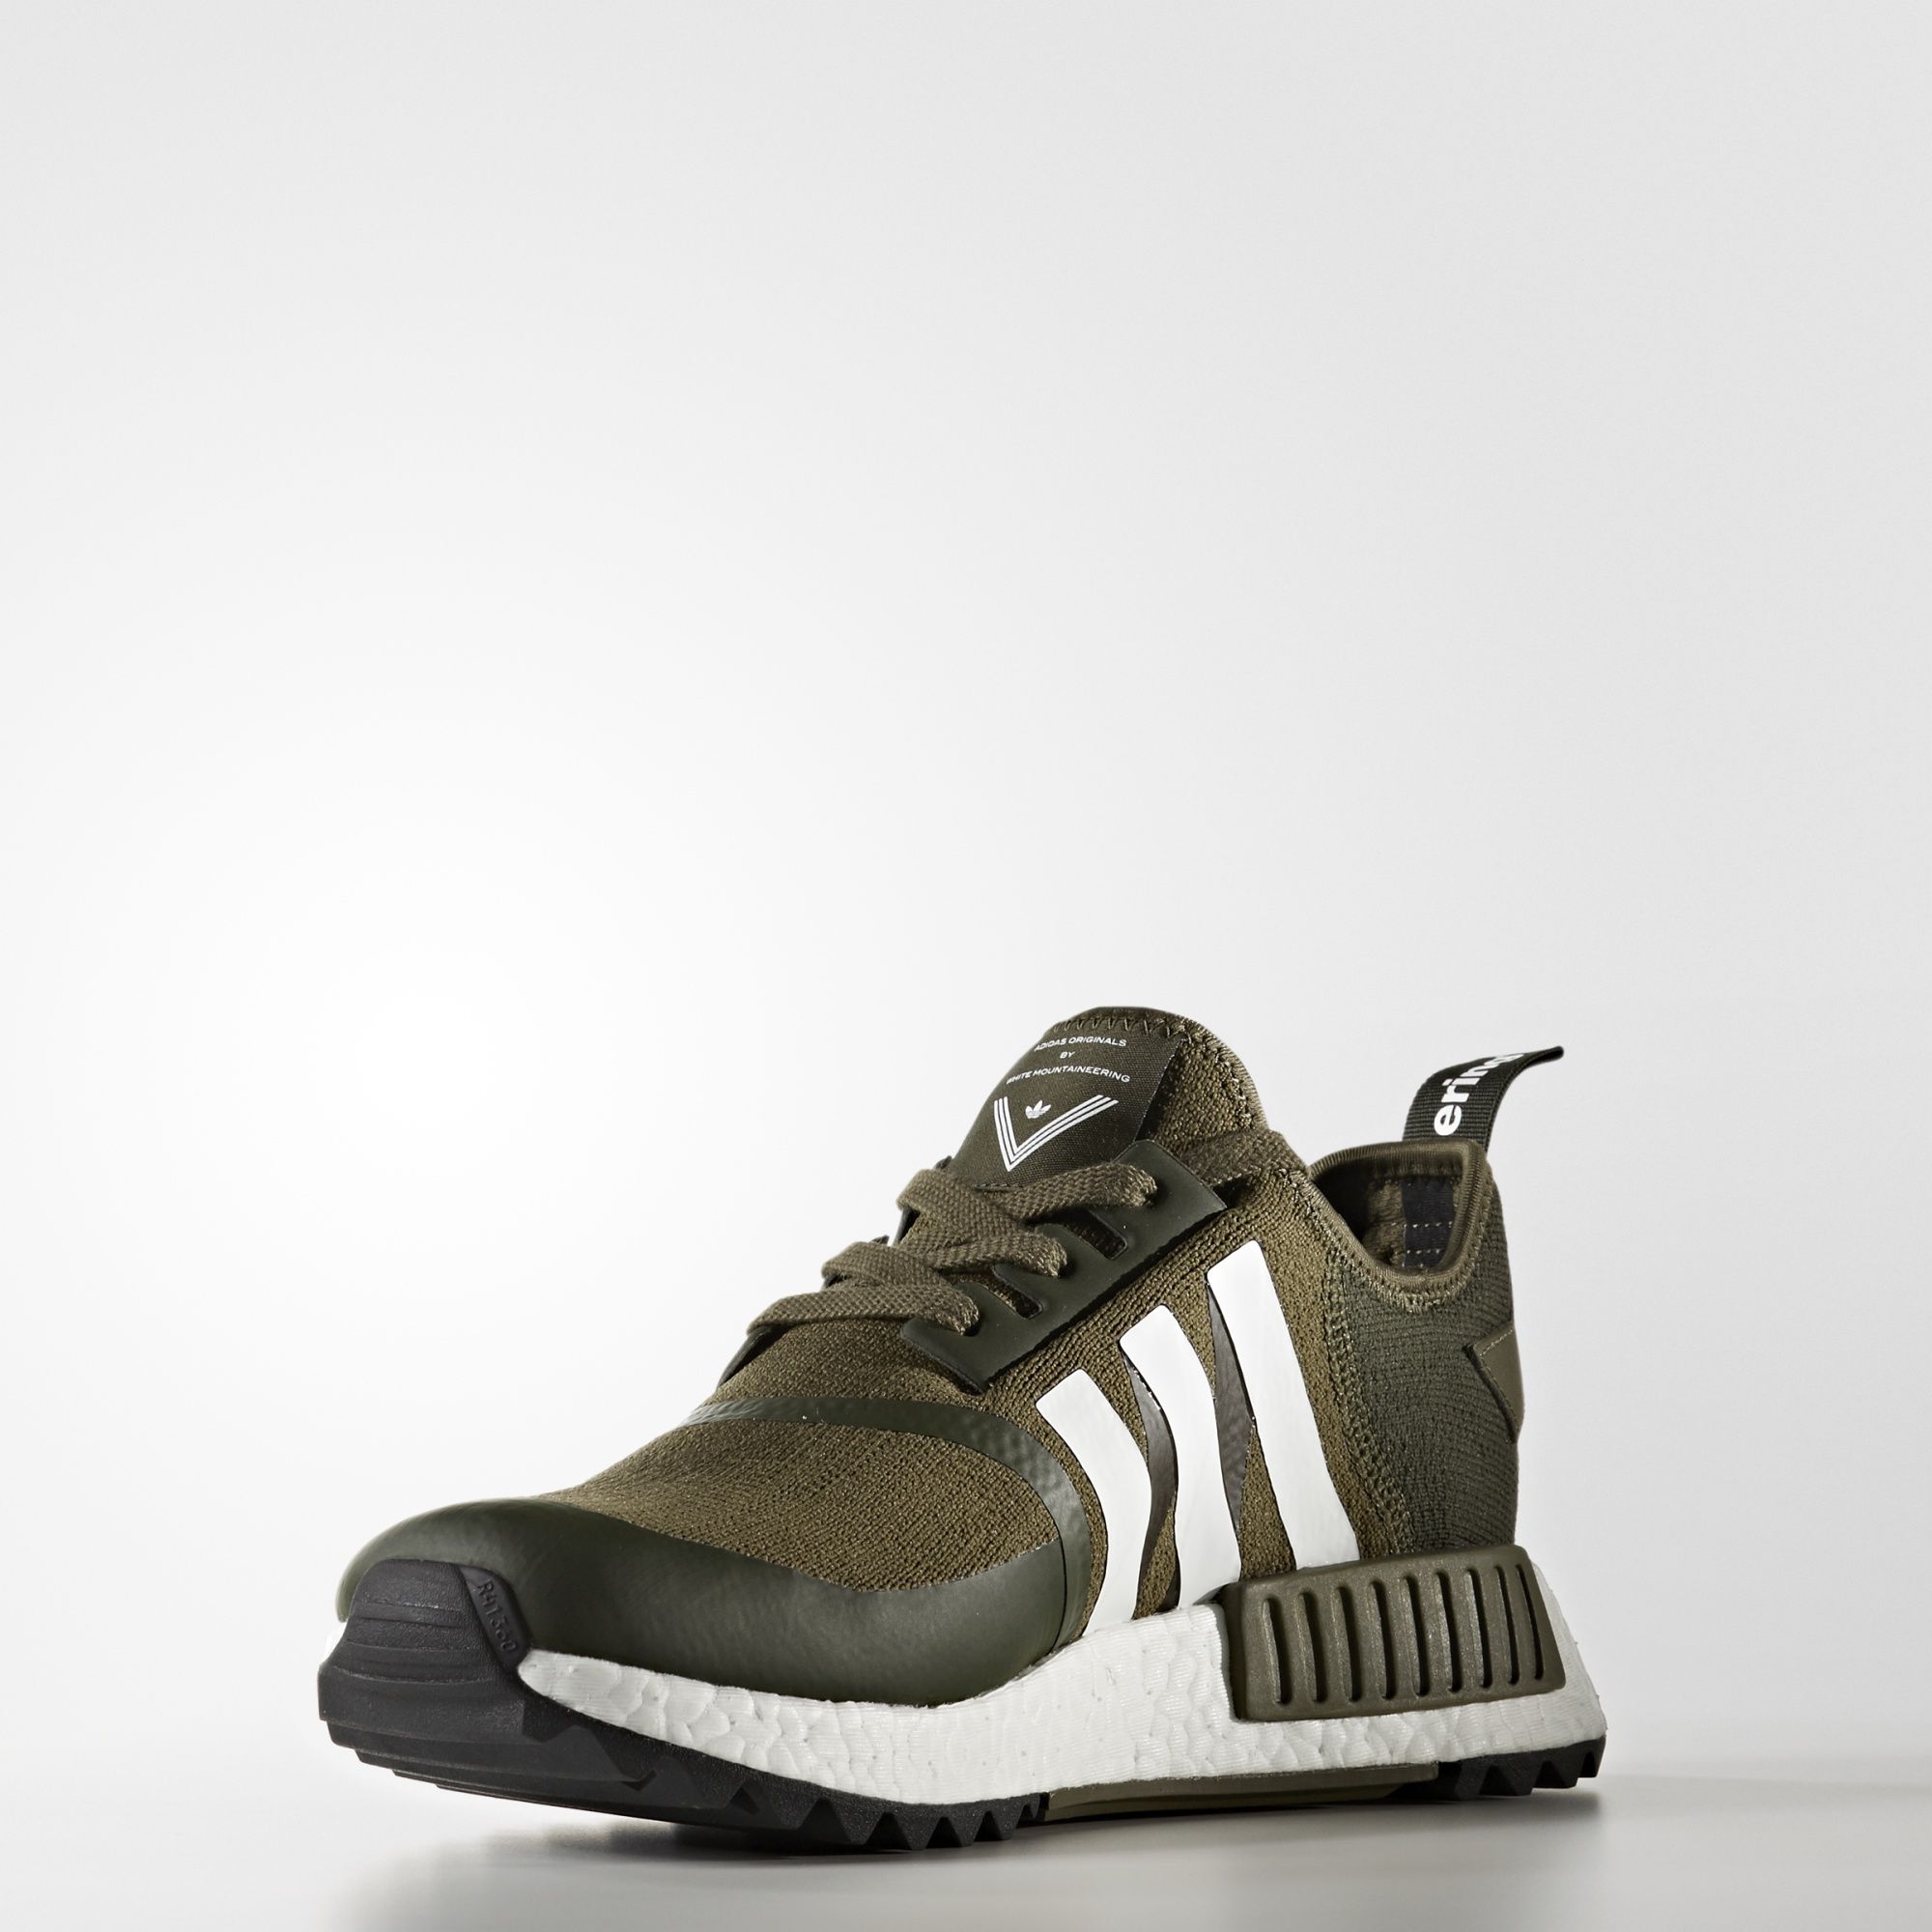 Adidas x White Mountaineering
NMD_R1 Trail Primeknit
Trace Olive / Footwear White